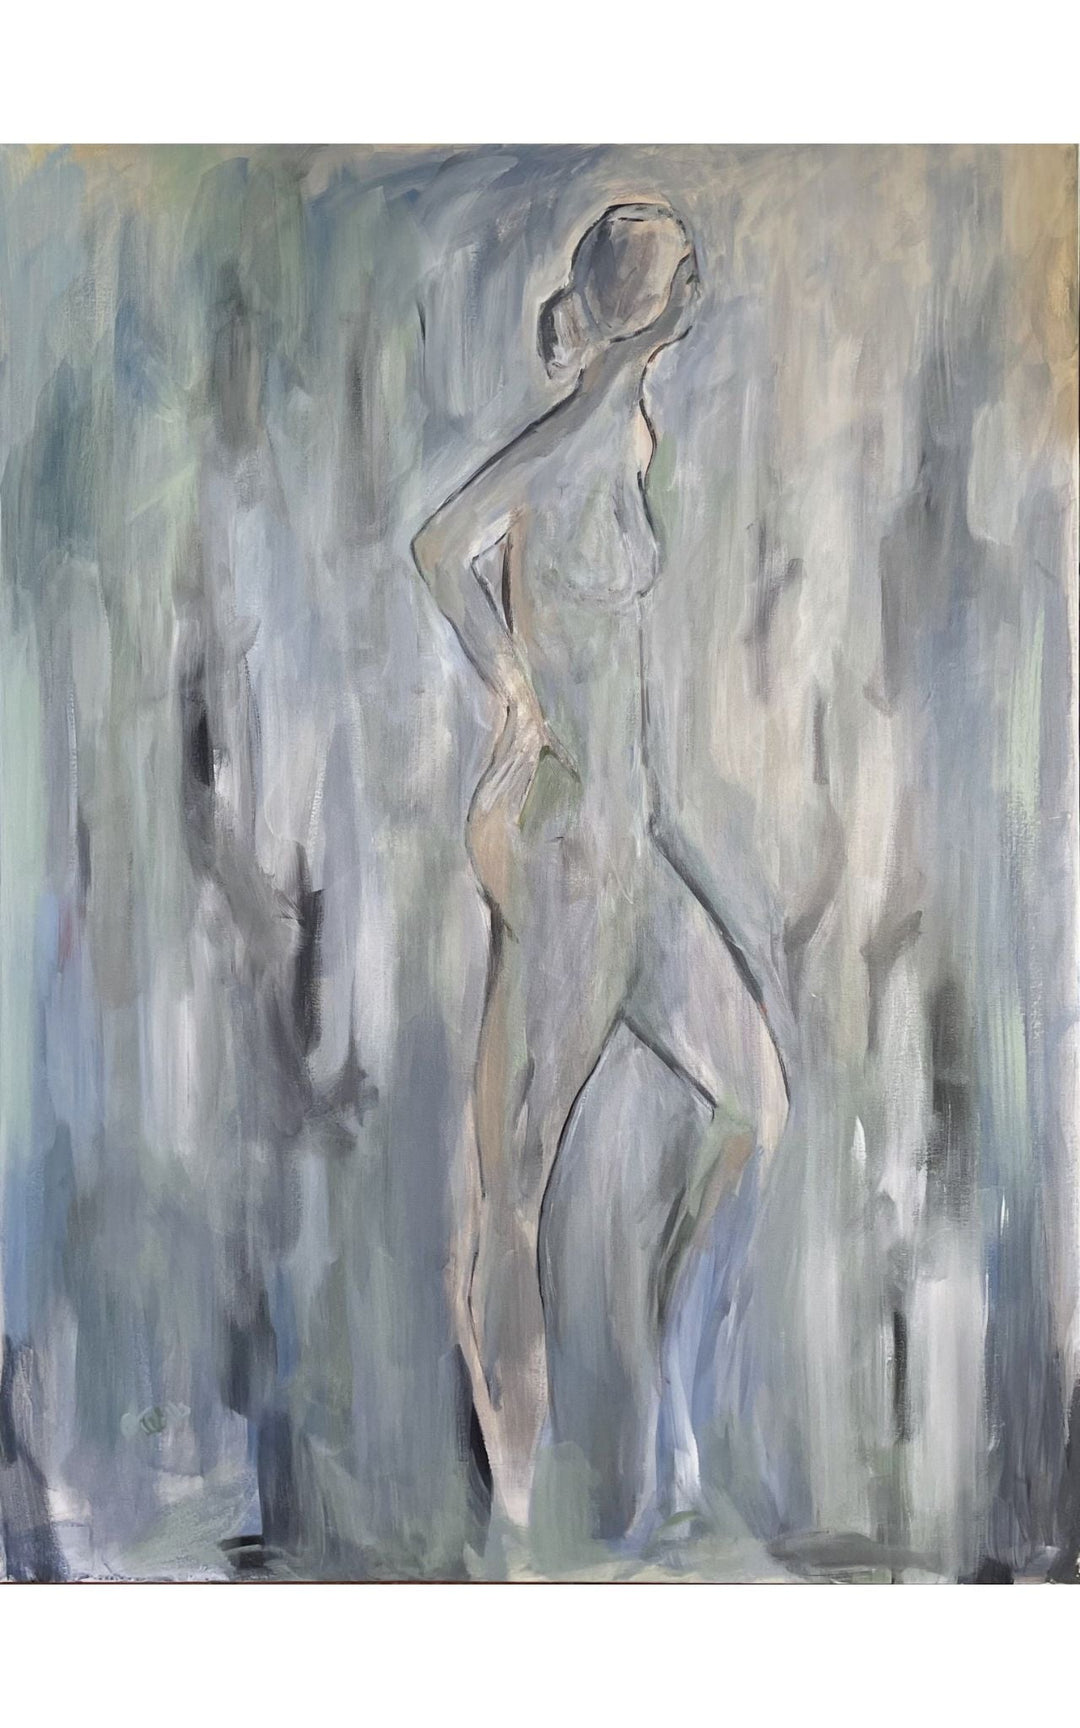 Abstract female figure side view with hand on hips using light blue hues by Geoff Wells titled Blue Light - Artly International